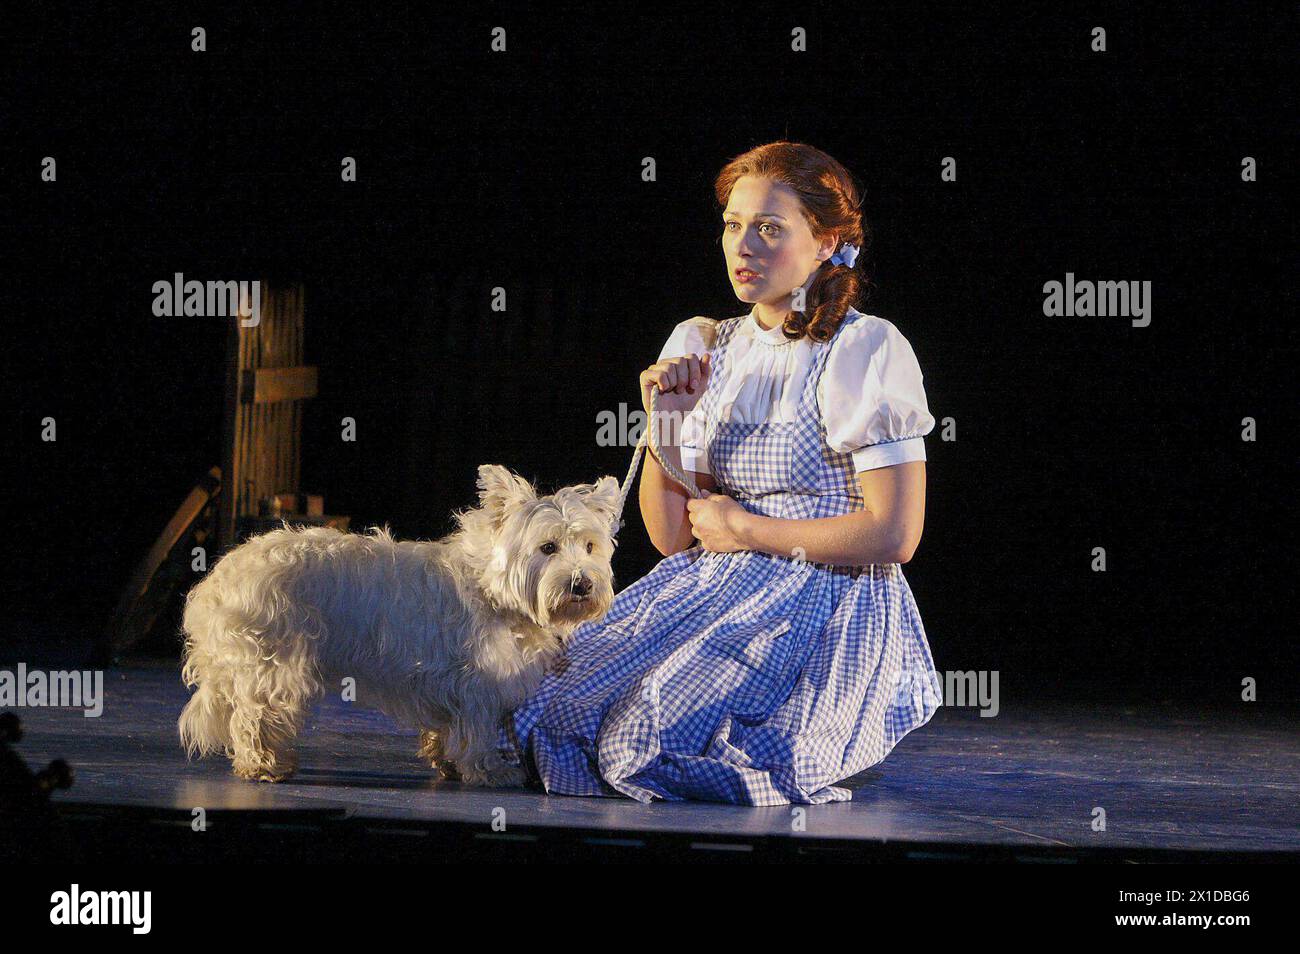 Sian Brooke (Dorothy Gale) with Bobby as 'Toto' in THE WIZARD OF OZ at the Royal Festival Hall, Southbank Centre, London SE1  29/07/2008 after the novel by by L. Frank Baum  music & lyrics: Harold Arlen & E. Y. Harburg   adapted by John Kane for the RSC  design: Michael Vale  lighting: Mike Gunning  choreography: Nick Winston  director: Jude Kelly  Royal Festival Hall (RFH), Southbank Centre, London SE1    29/07/2008 Stock Photo